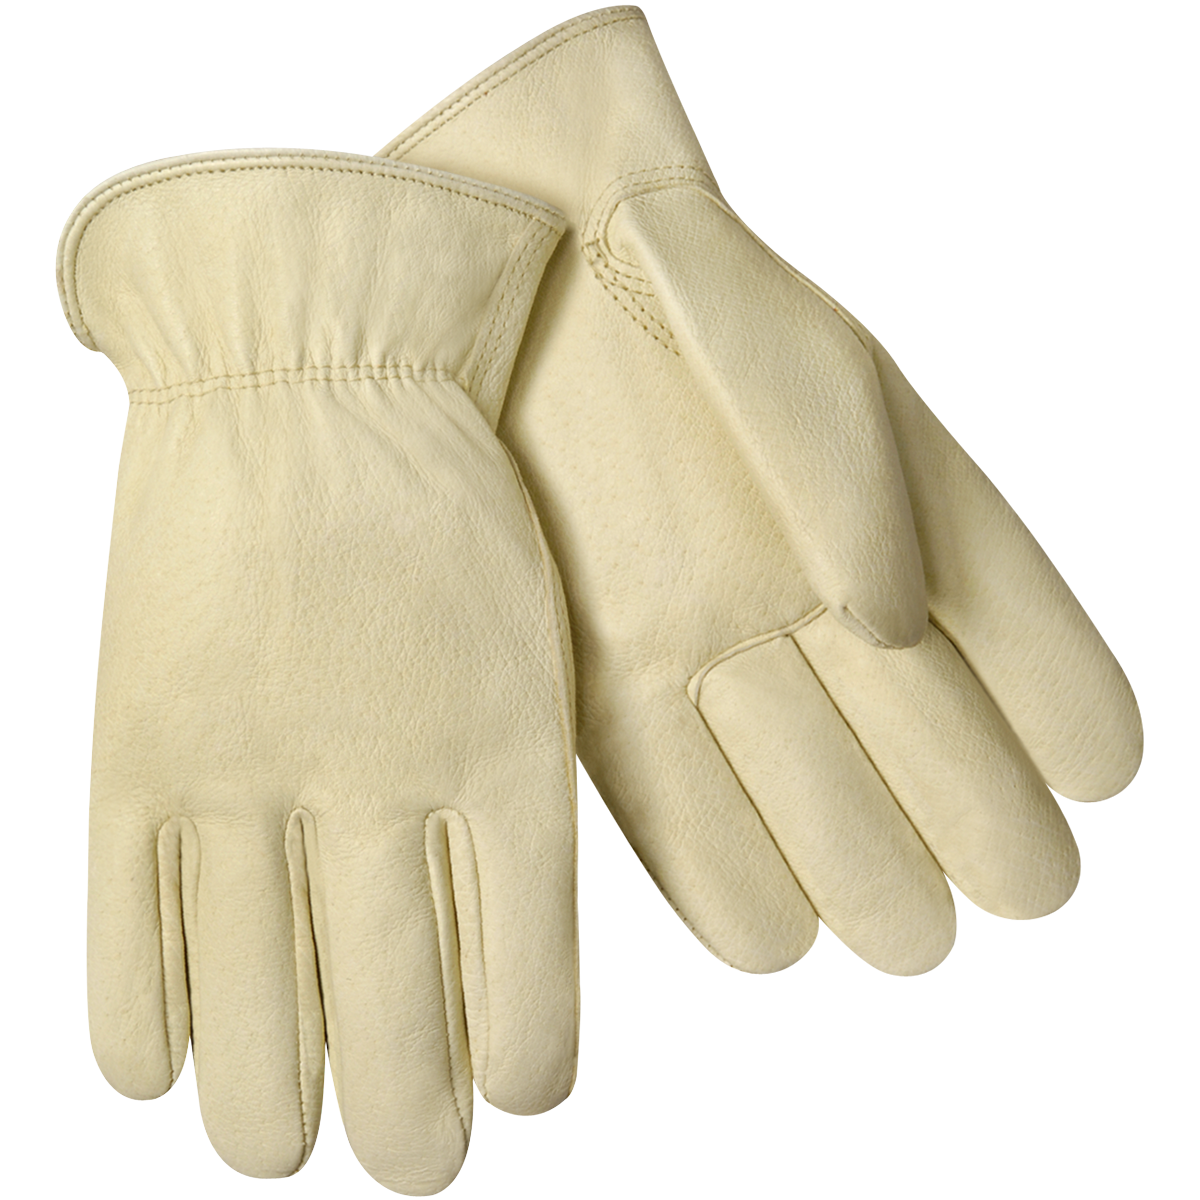 Winter Gloves Background PNG